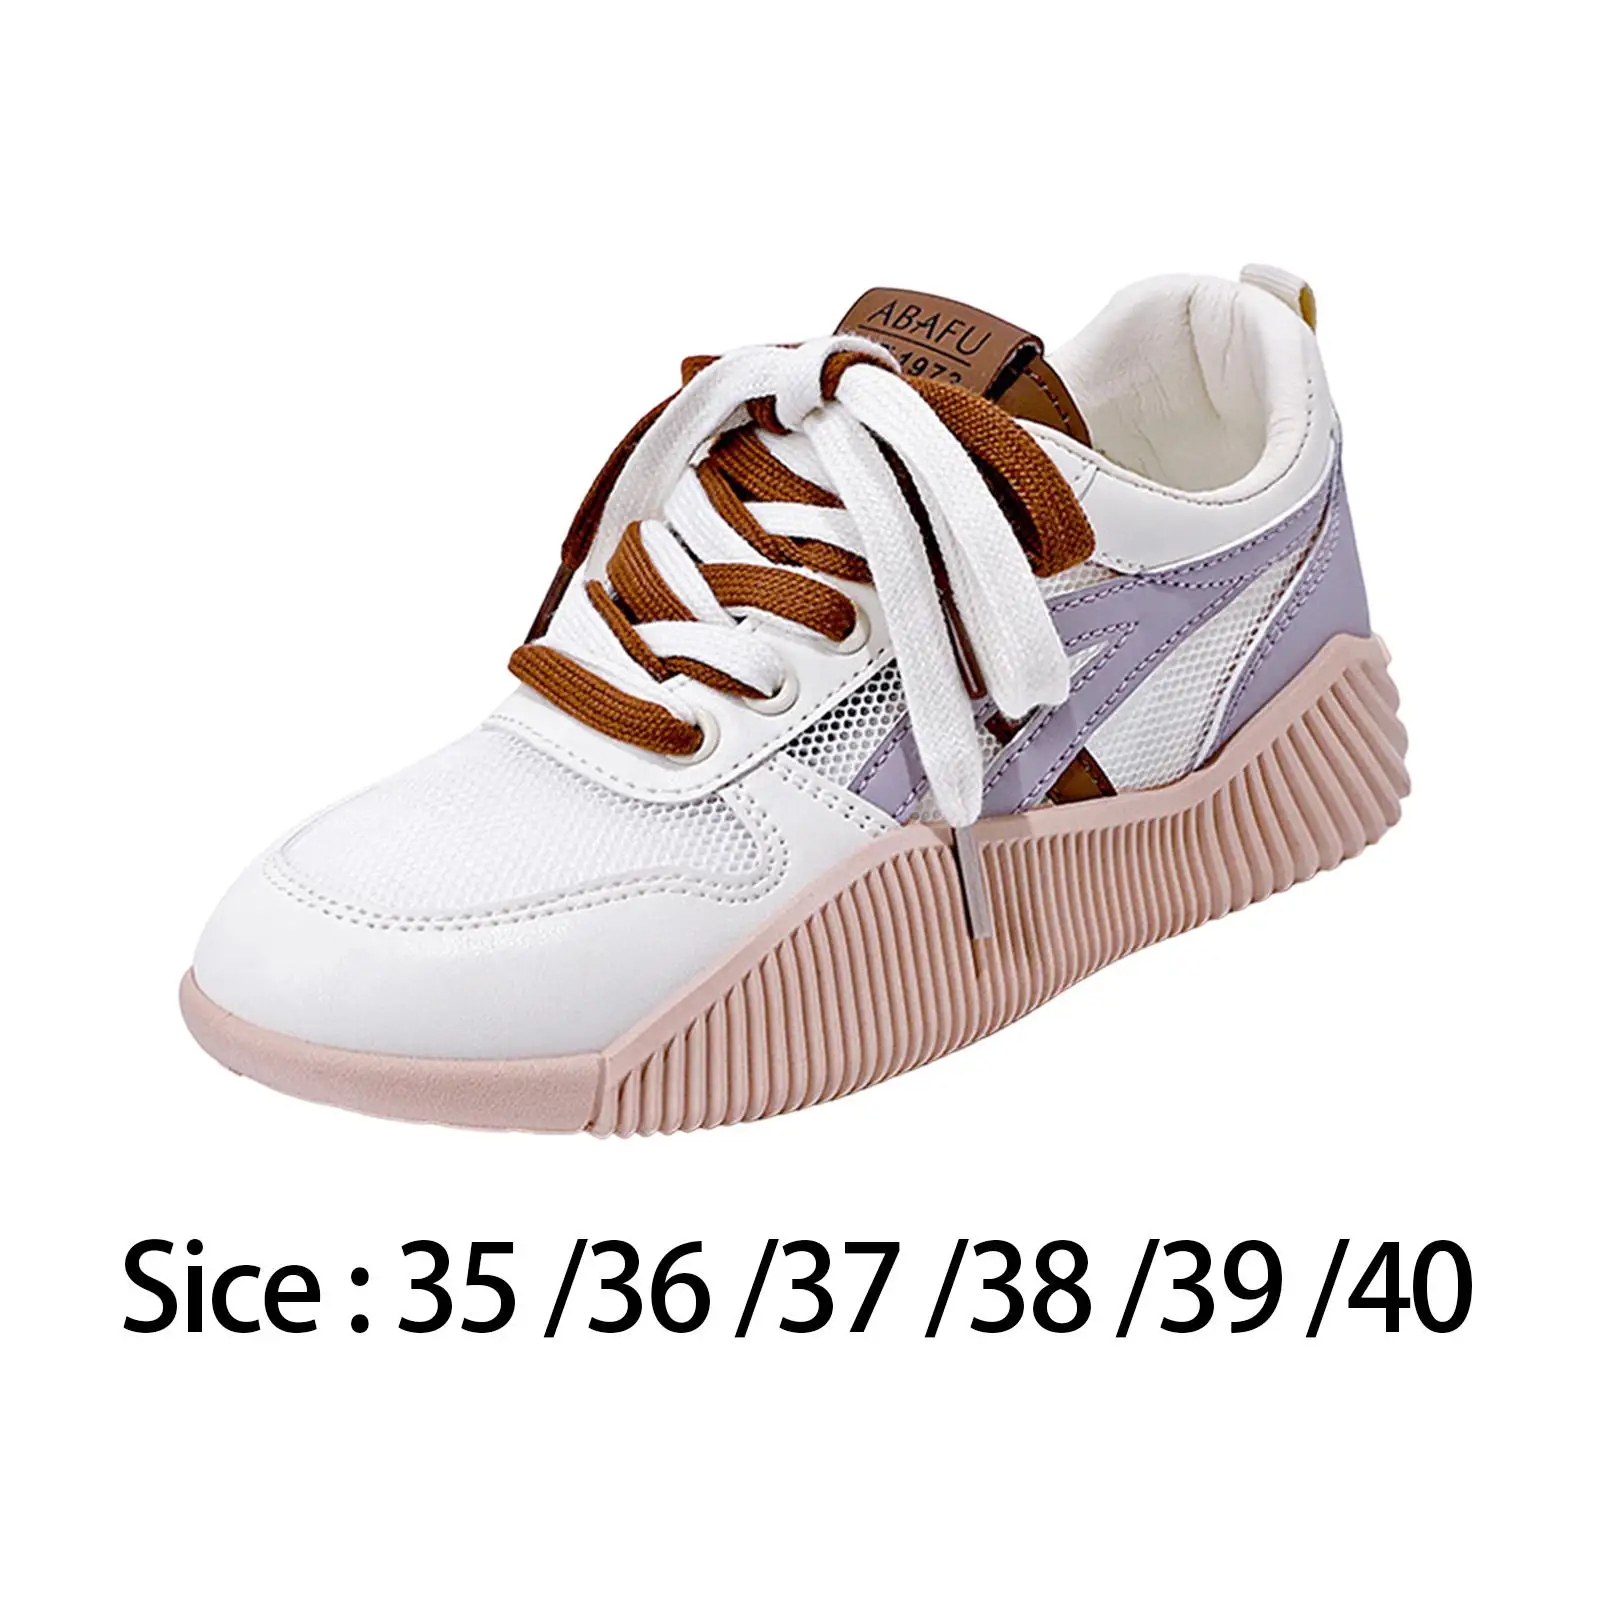 

Women Platform Sneakers Tennis Shoes PU Upper Thick Bottom Nonslip Casual Shoes Walking Shoes for Running Work Driving Workout